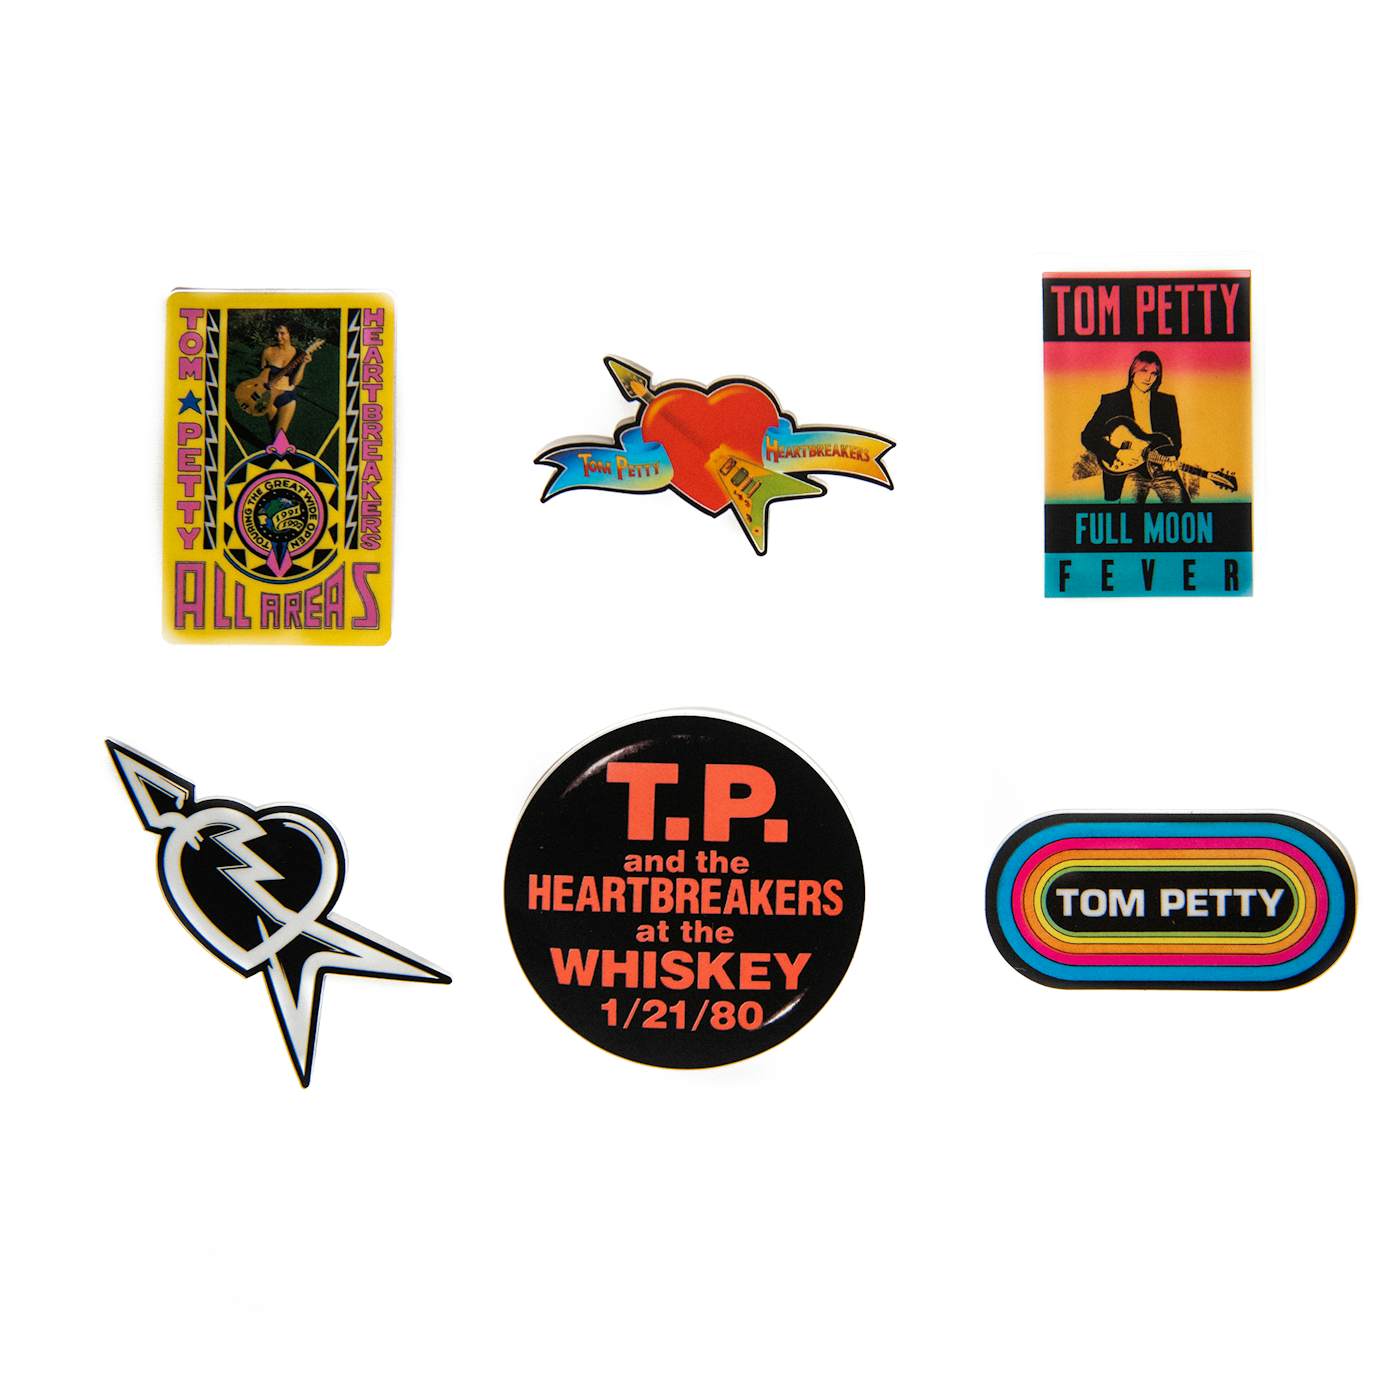 Tom Petty and the Heartbreakers Vintage Sticker Pack